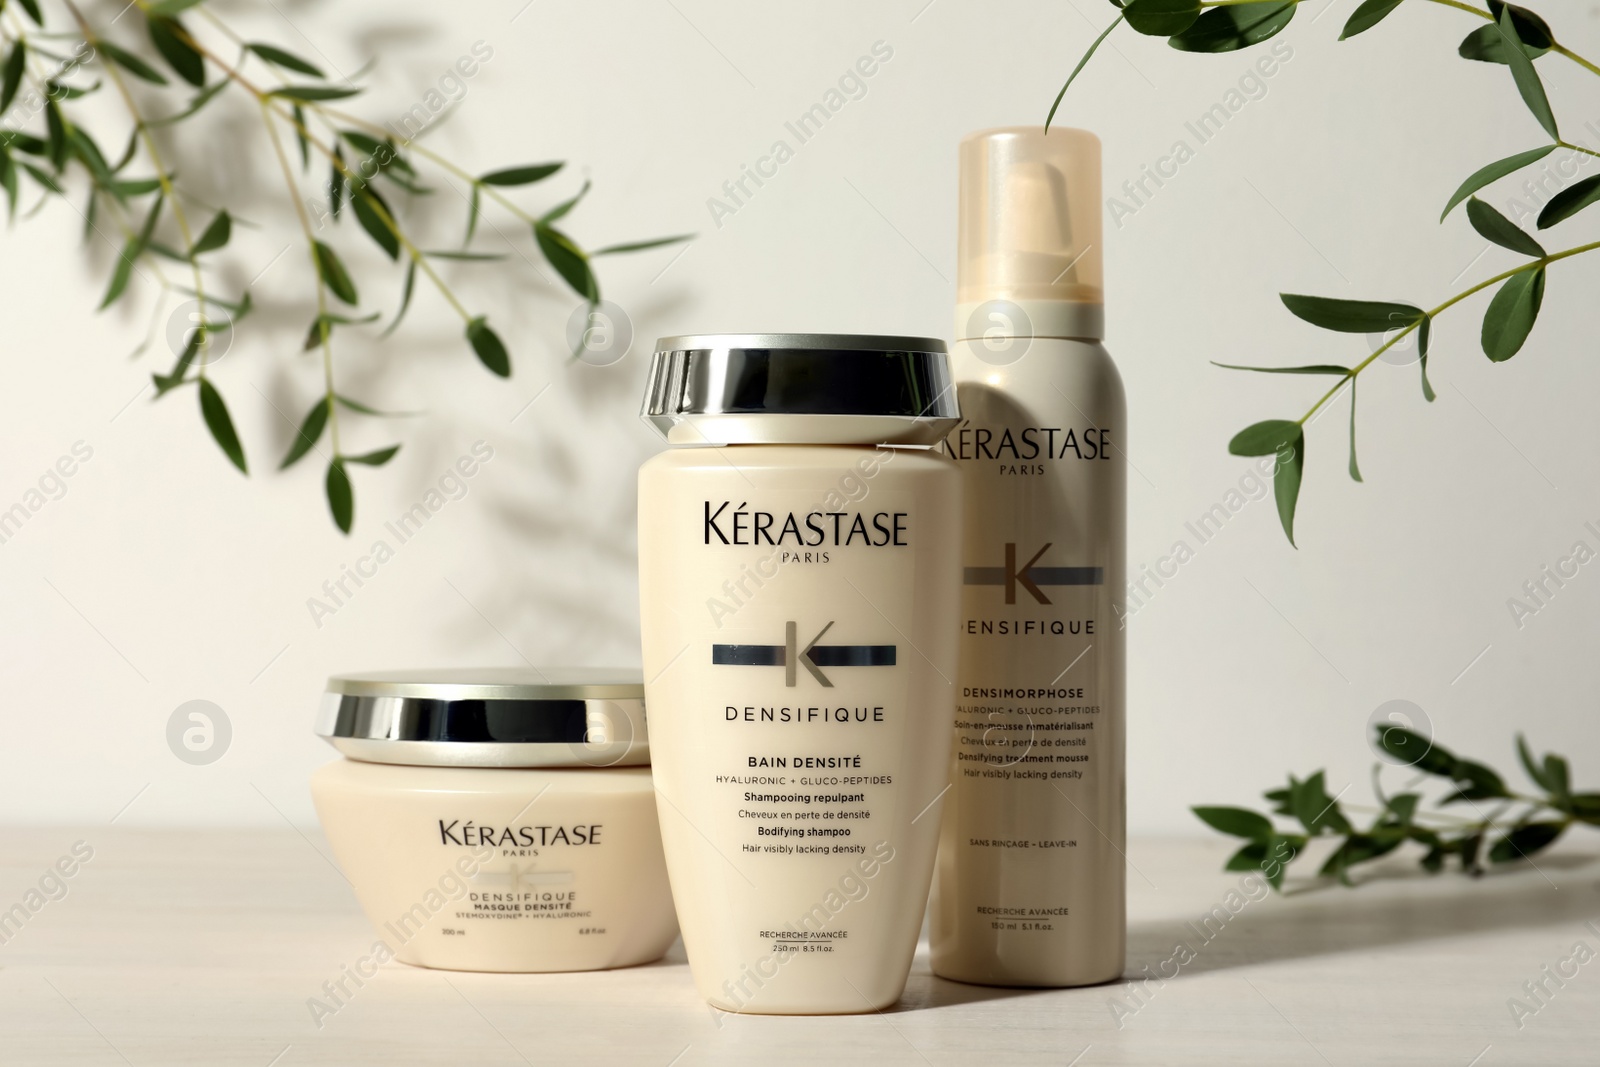 Photo of MYKOLAIV, UKRAINE - SEPTEMBER 07, 2021: Set of Kerastase hair care cosmetic products on white wooden table